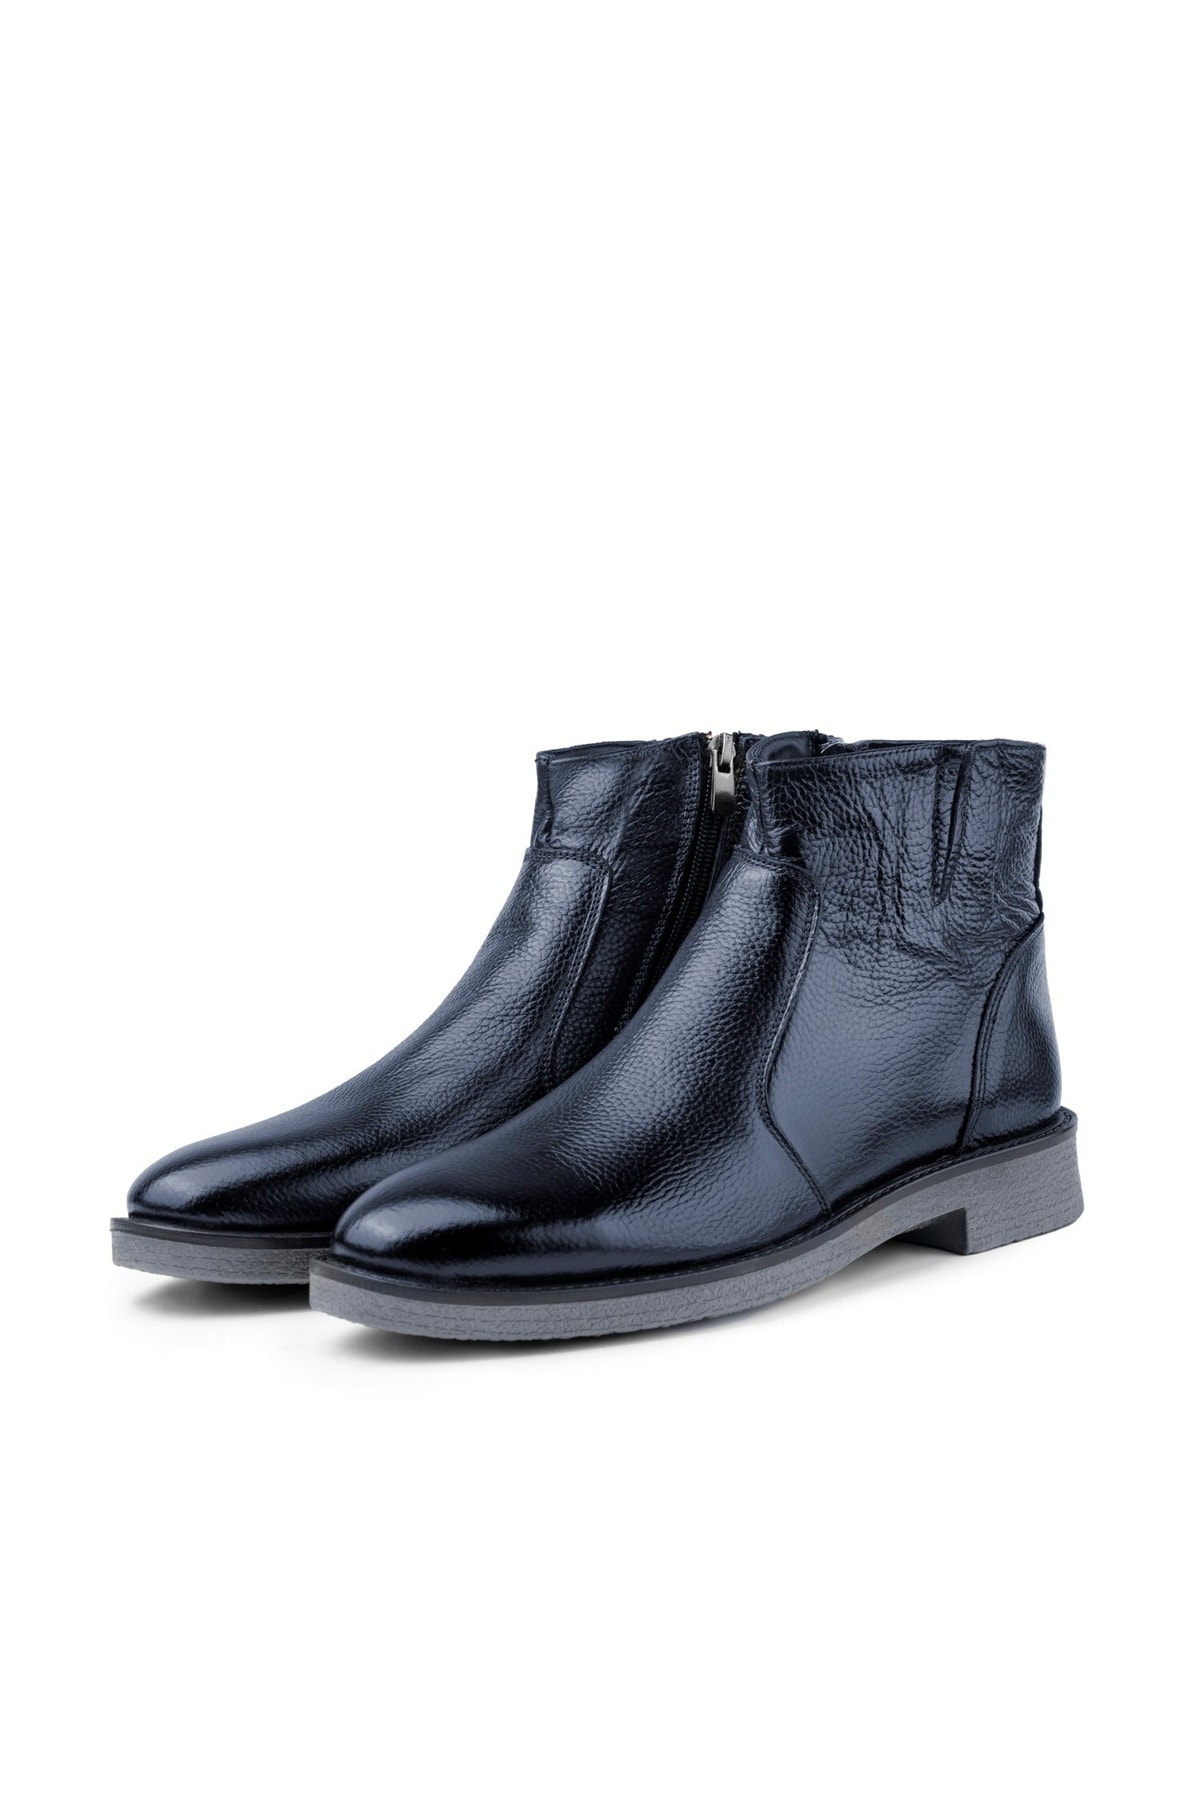 Ducavelli Bristol Genuine Leather Non-Slip Sole Zippered Chelsea Daily Boots Navy Blue